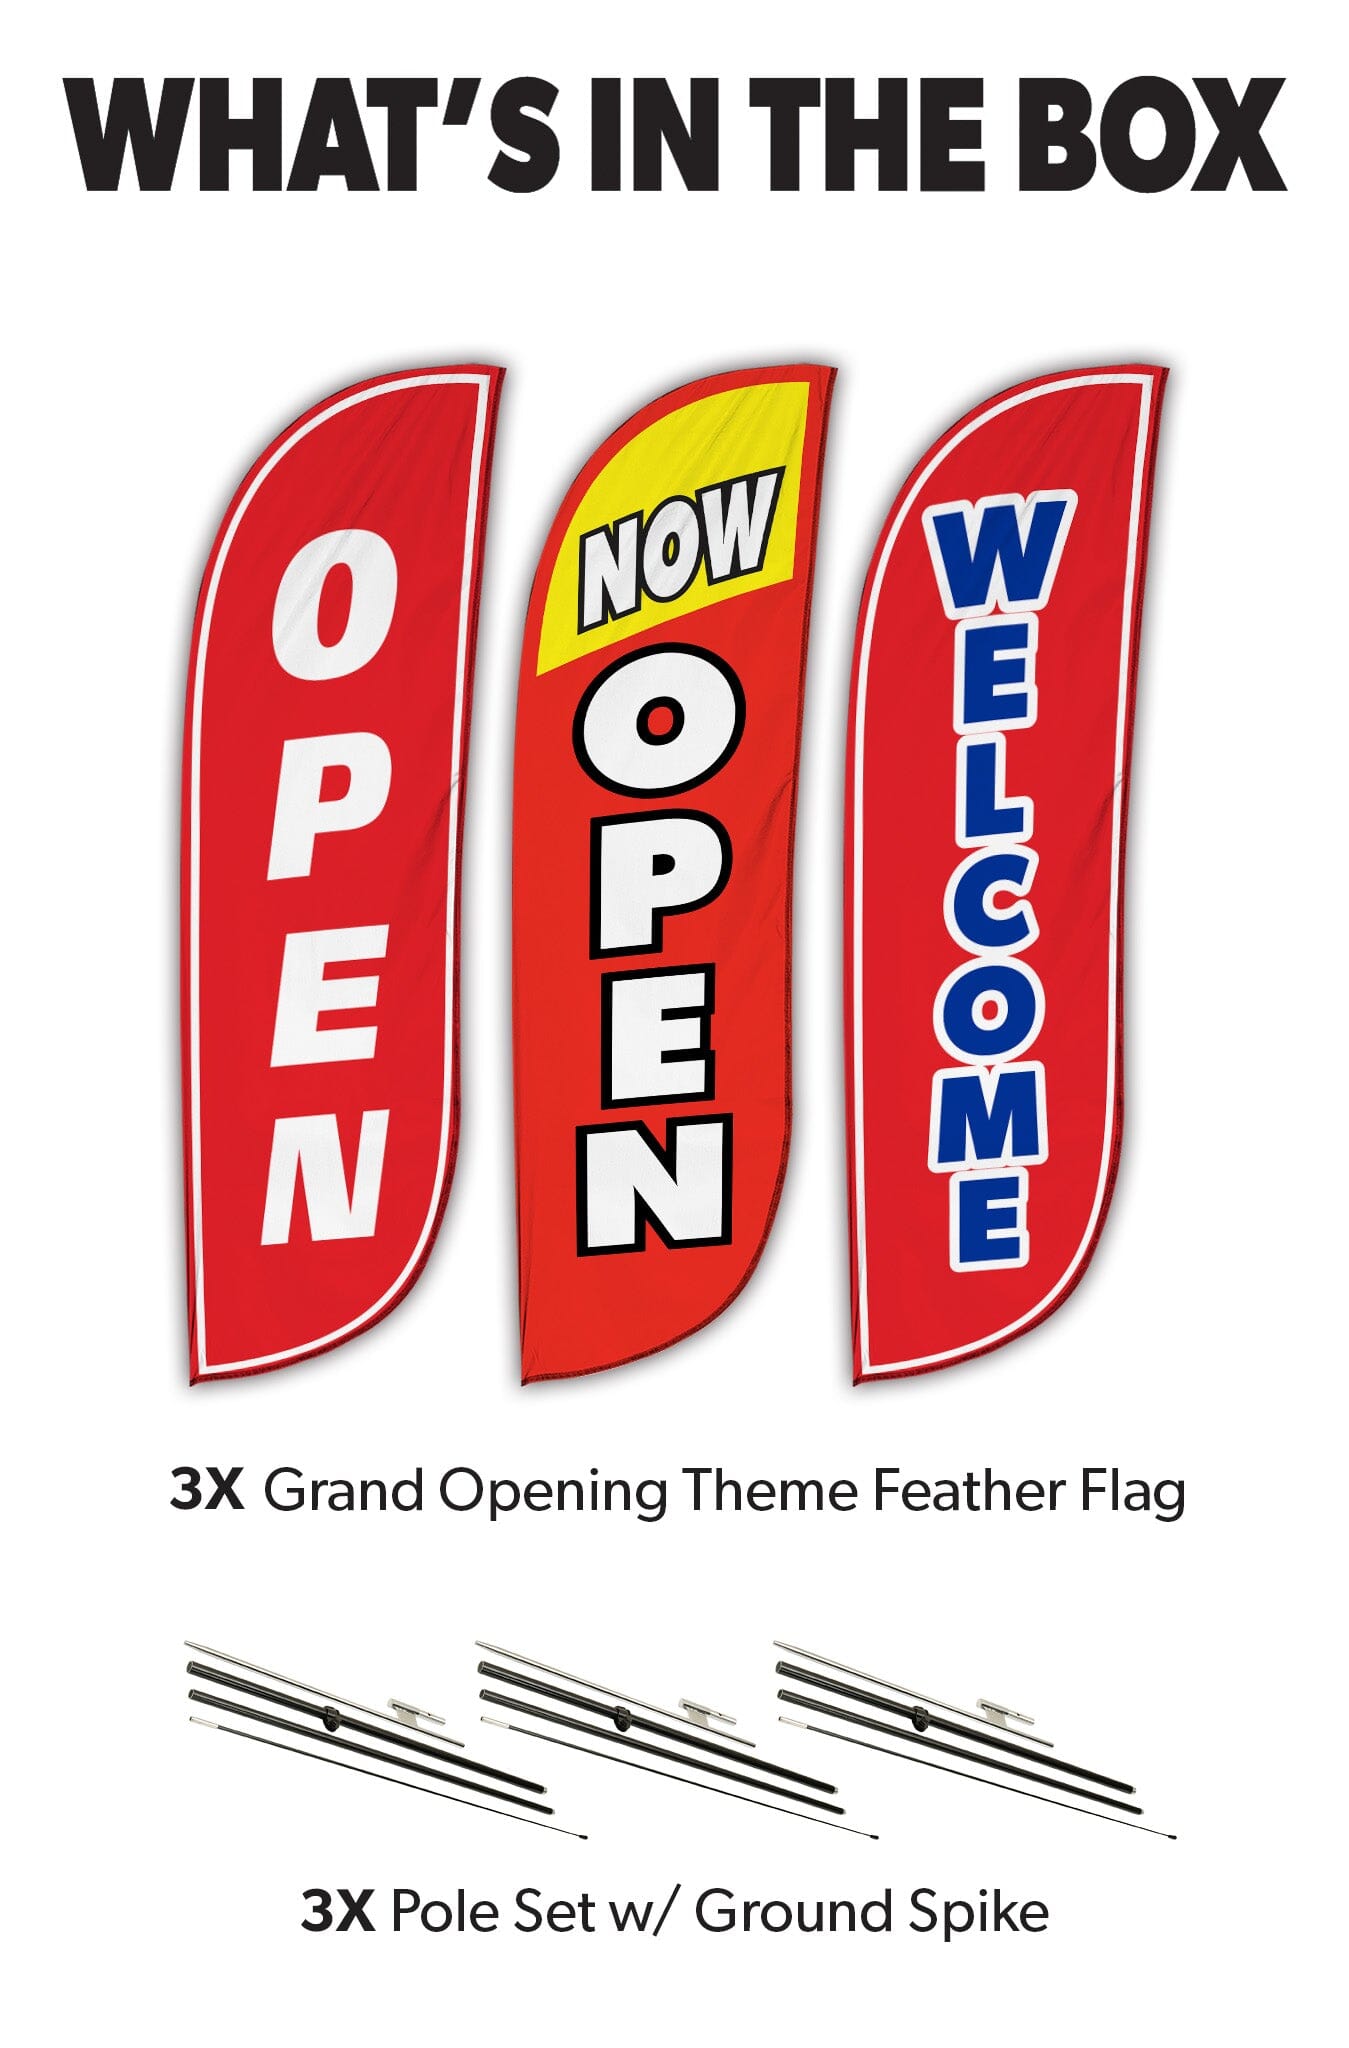 Grand Opening Feather Flag - Variety 3-Pack V2 w/ Ground Spike Pole Set 